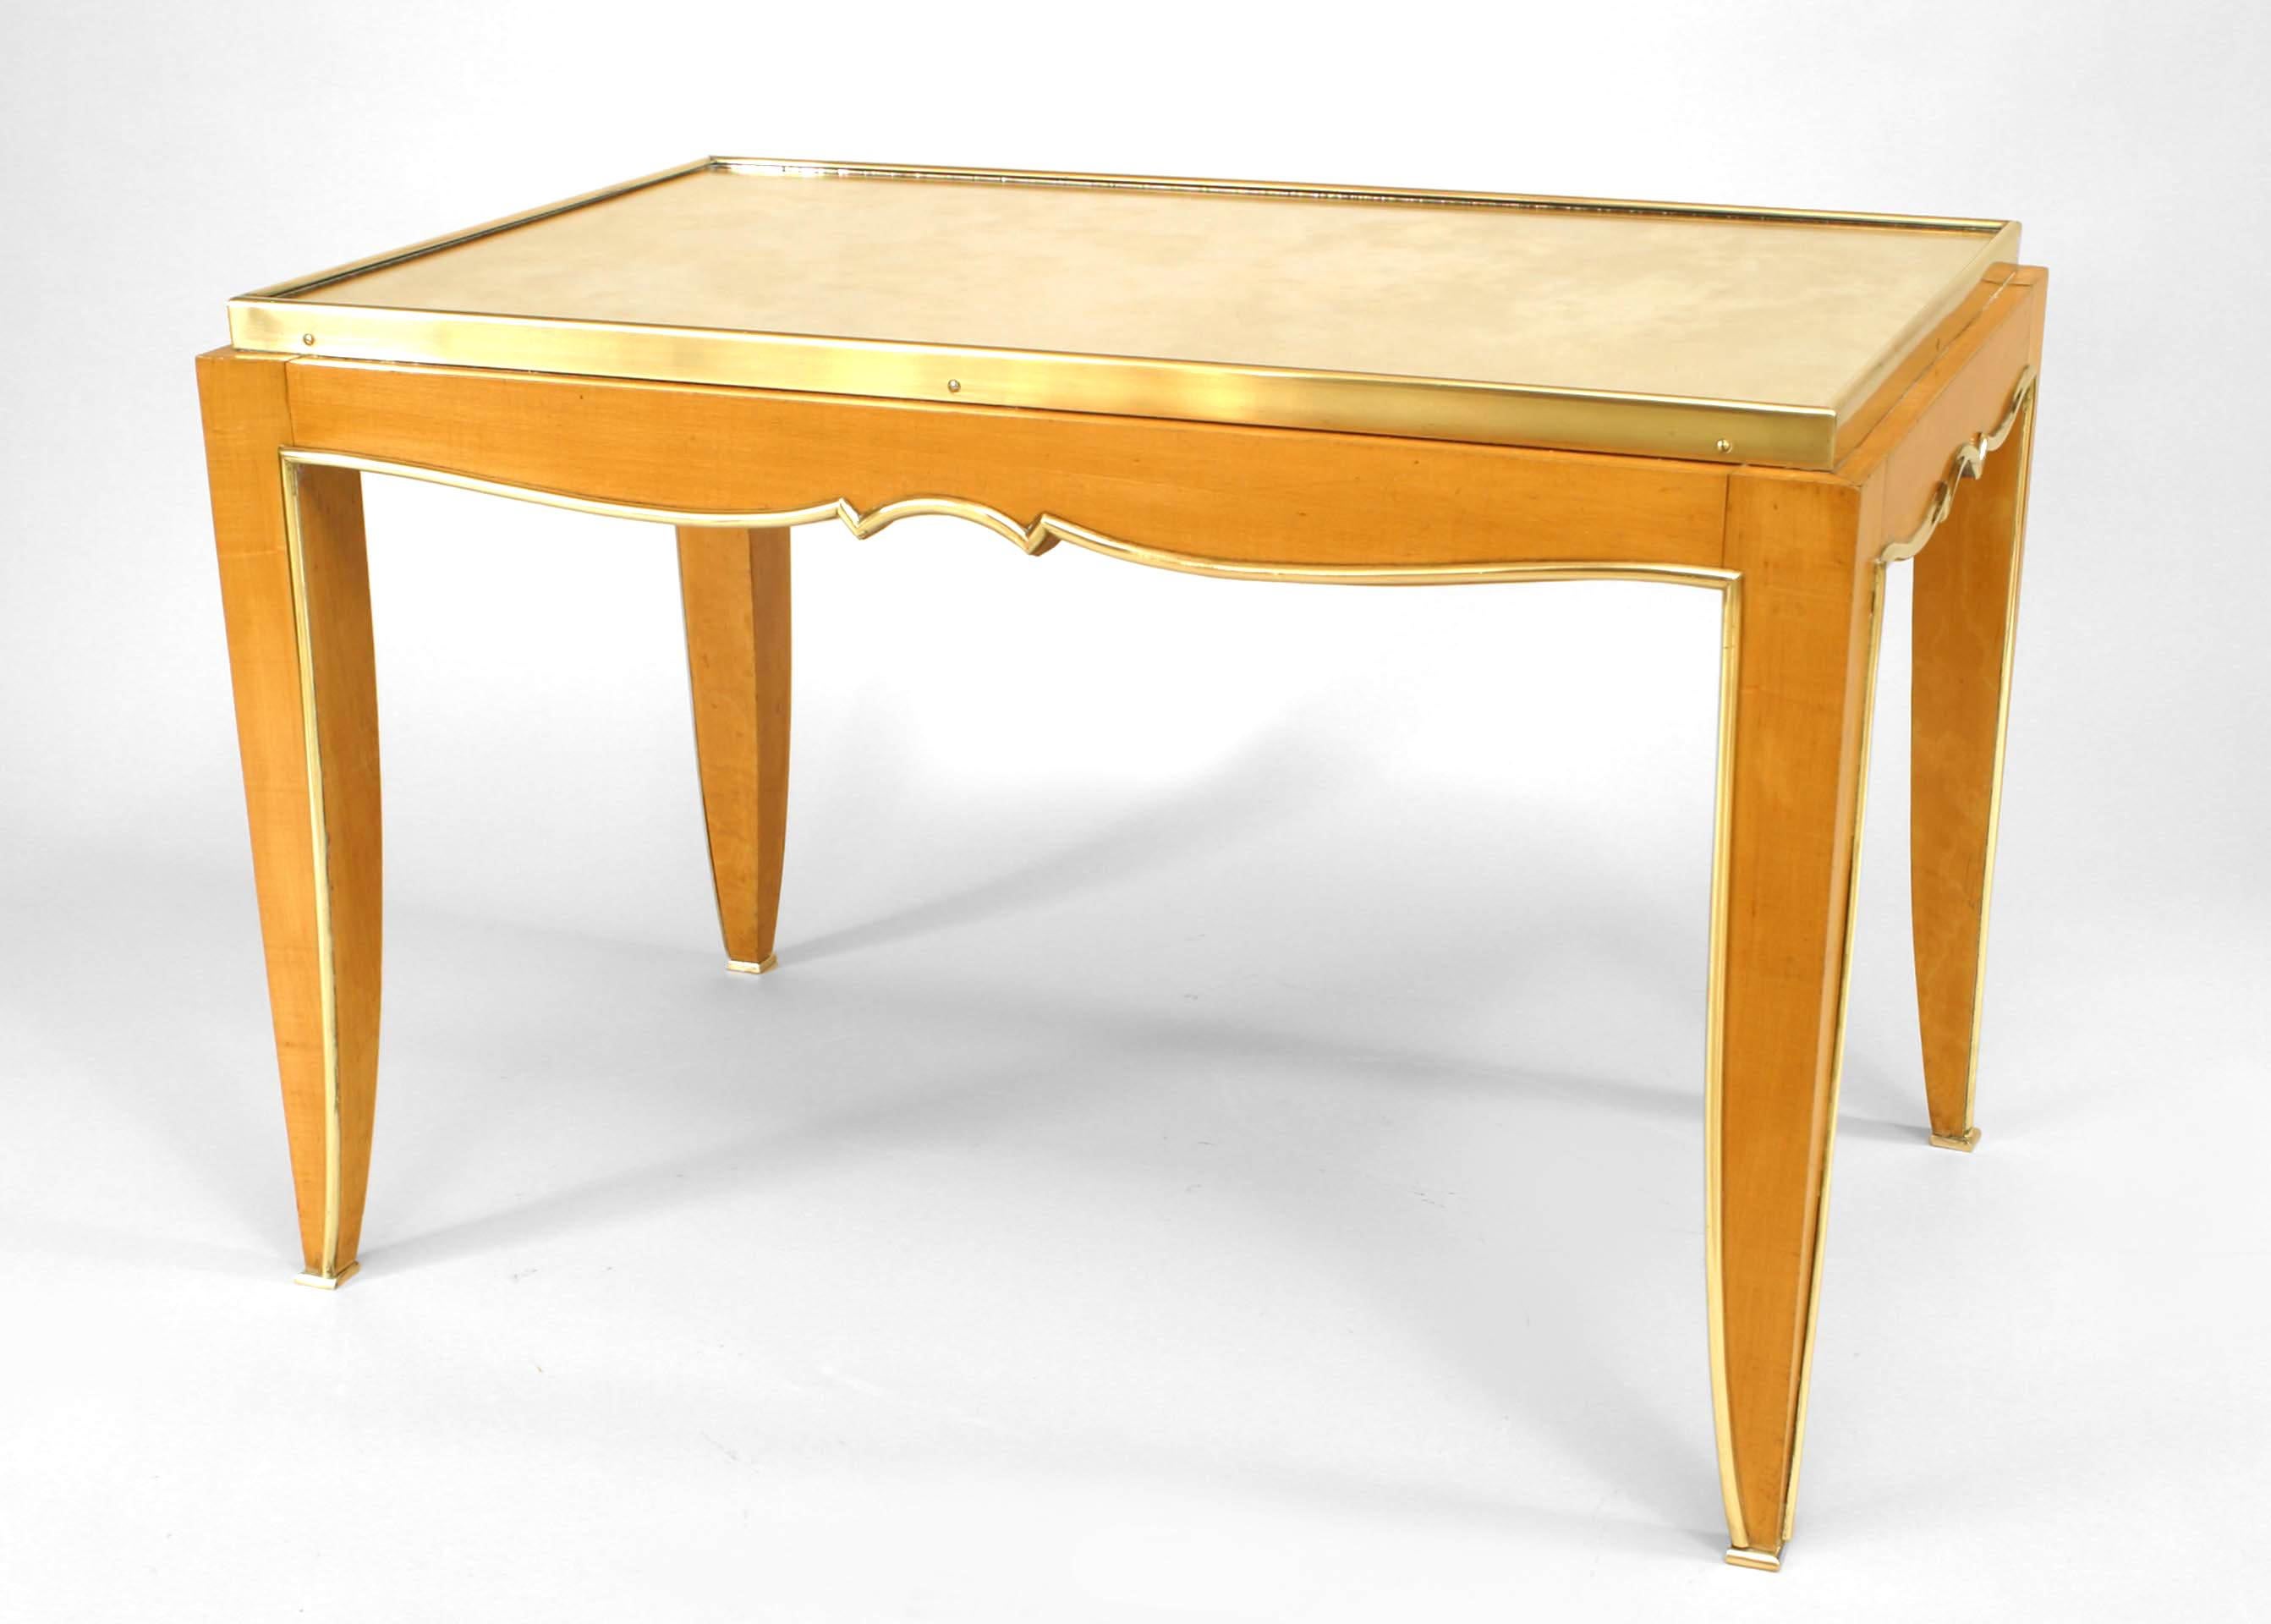 Attributed to French Art Deco designer Jules Leleu, this rectangular sycamore coffee table features an inset mirrored top over an apron and four legs decorated with bronze trim.

Jules Leleu was a French furniture designer famous for tempering